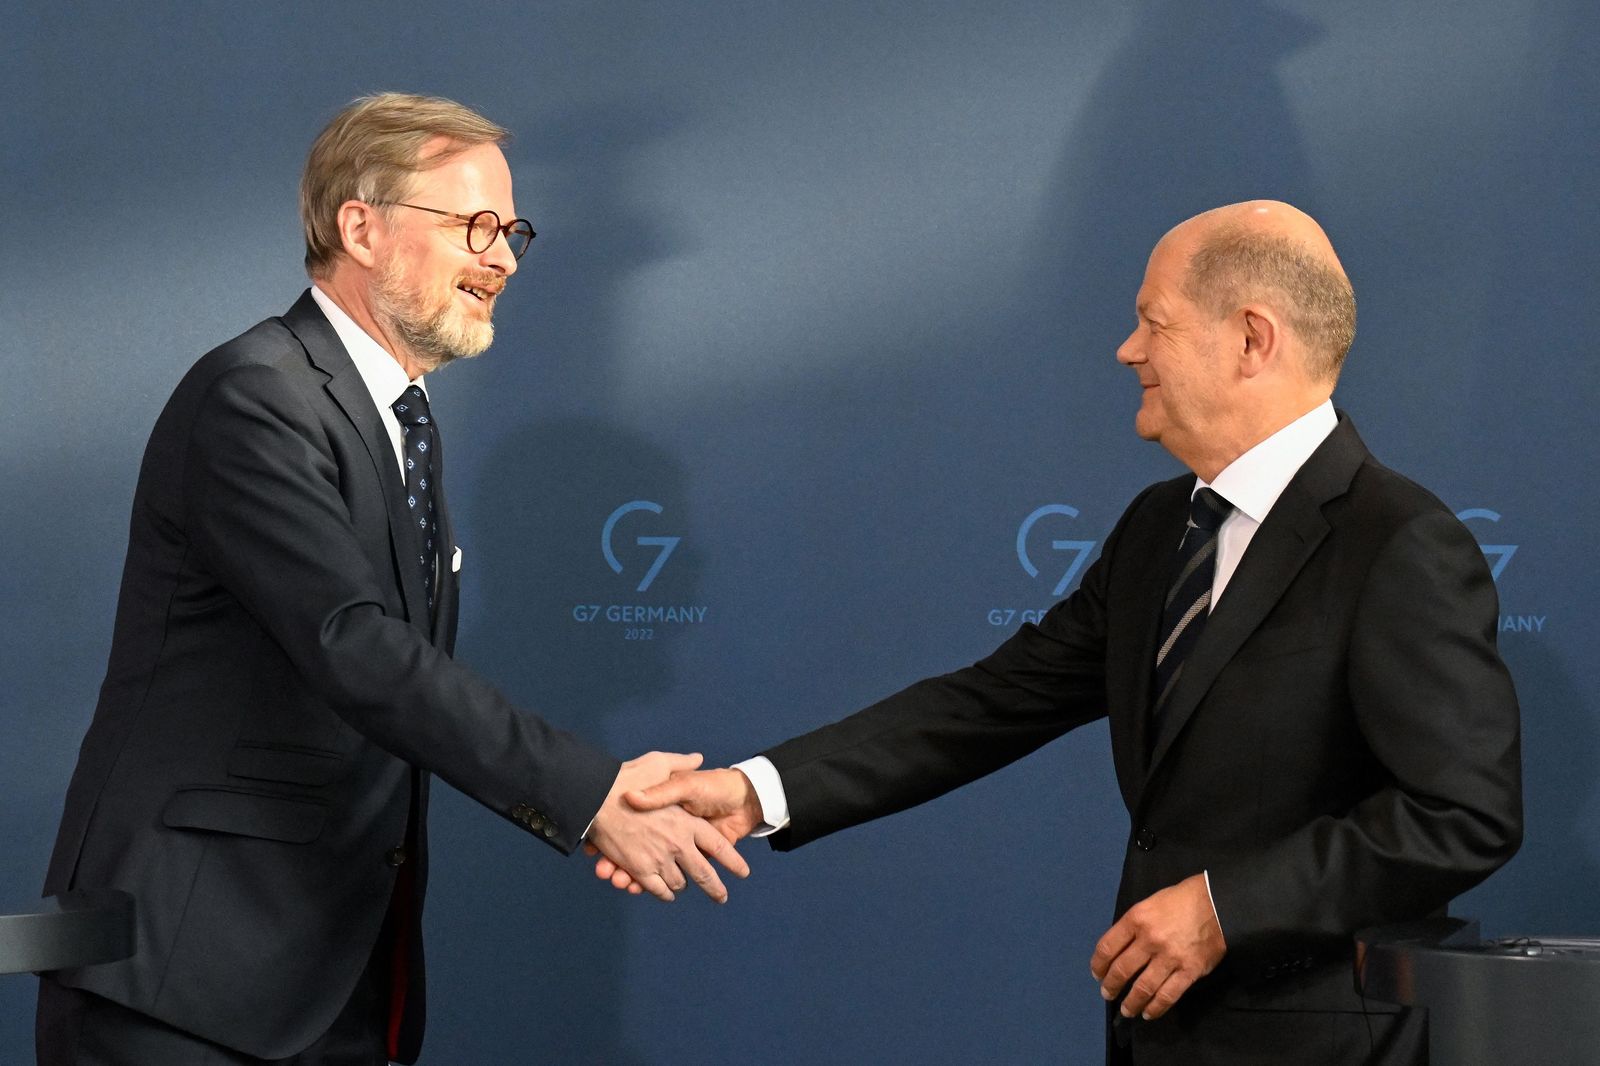 German Chancellor Olaf Scholz (R) and Czech Prime Minister Petr Fiala shake hands after addressing a press conference at the Chancellery in Berlin on May 5, 2022. (Photo by Tobias SCHWARZ / AFP) - AFP